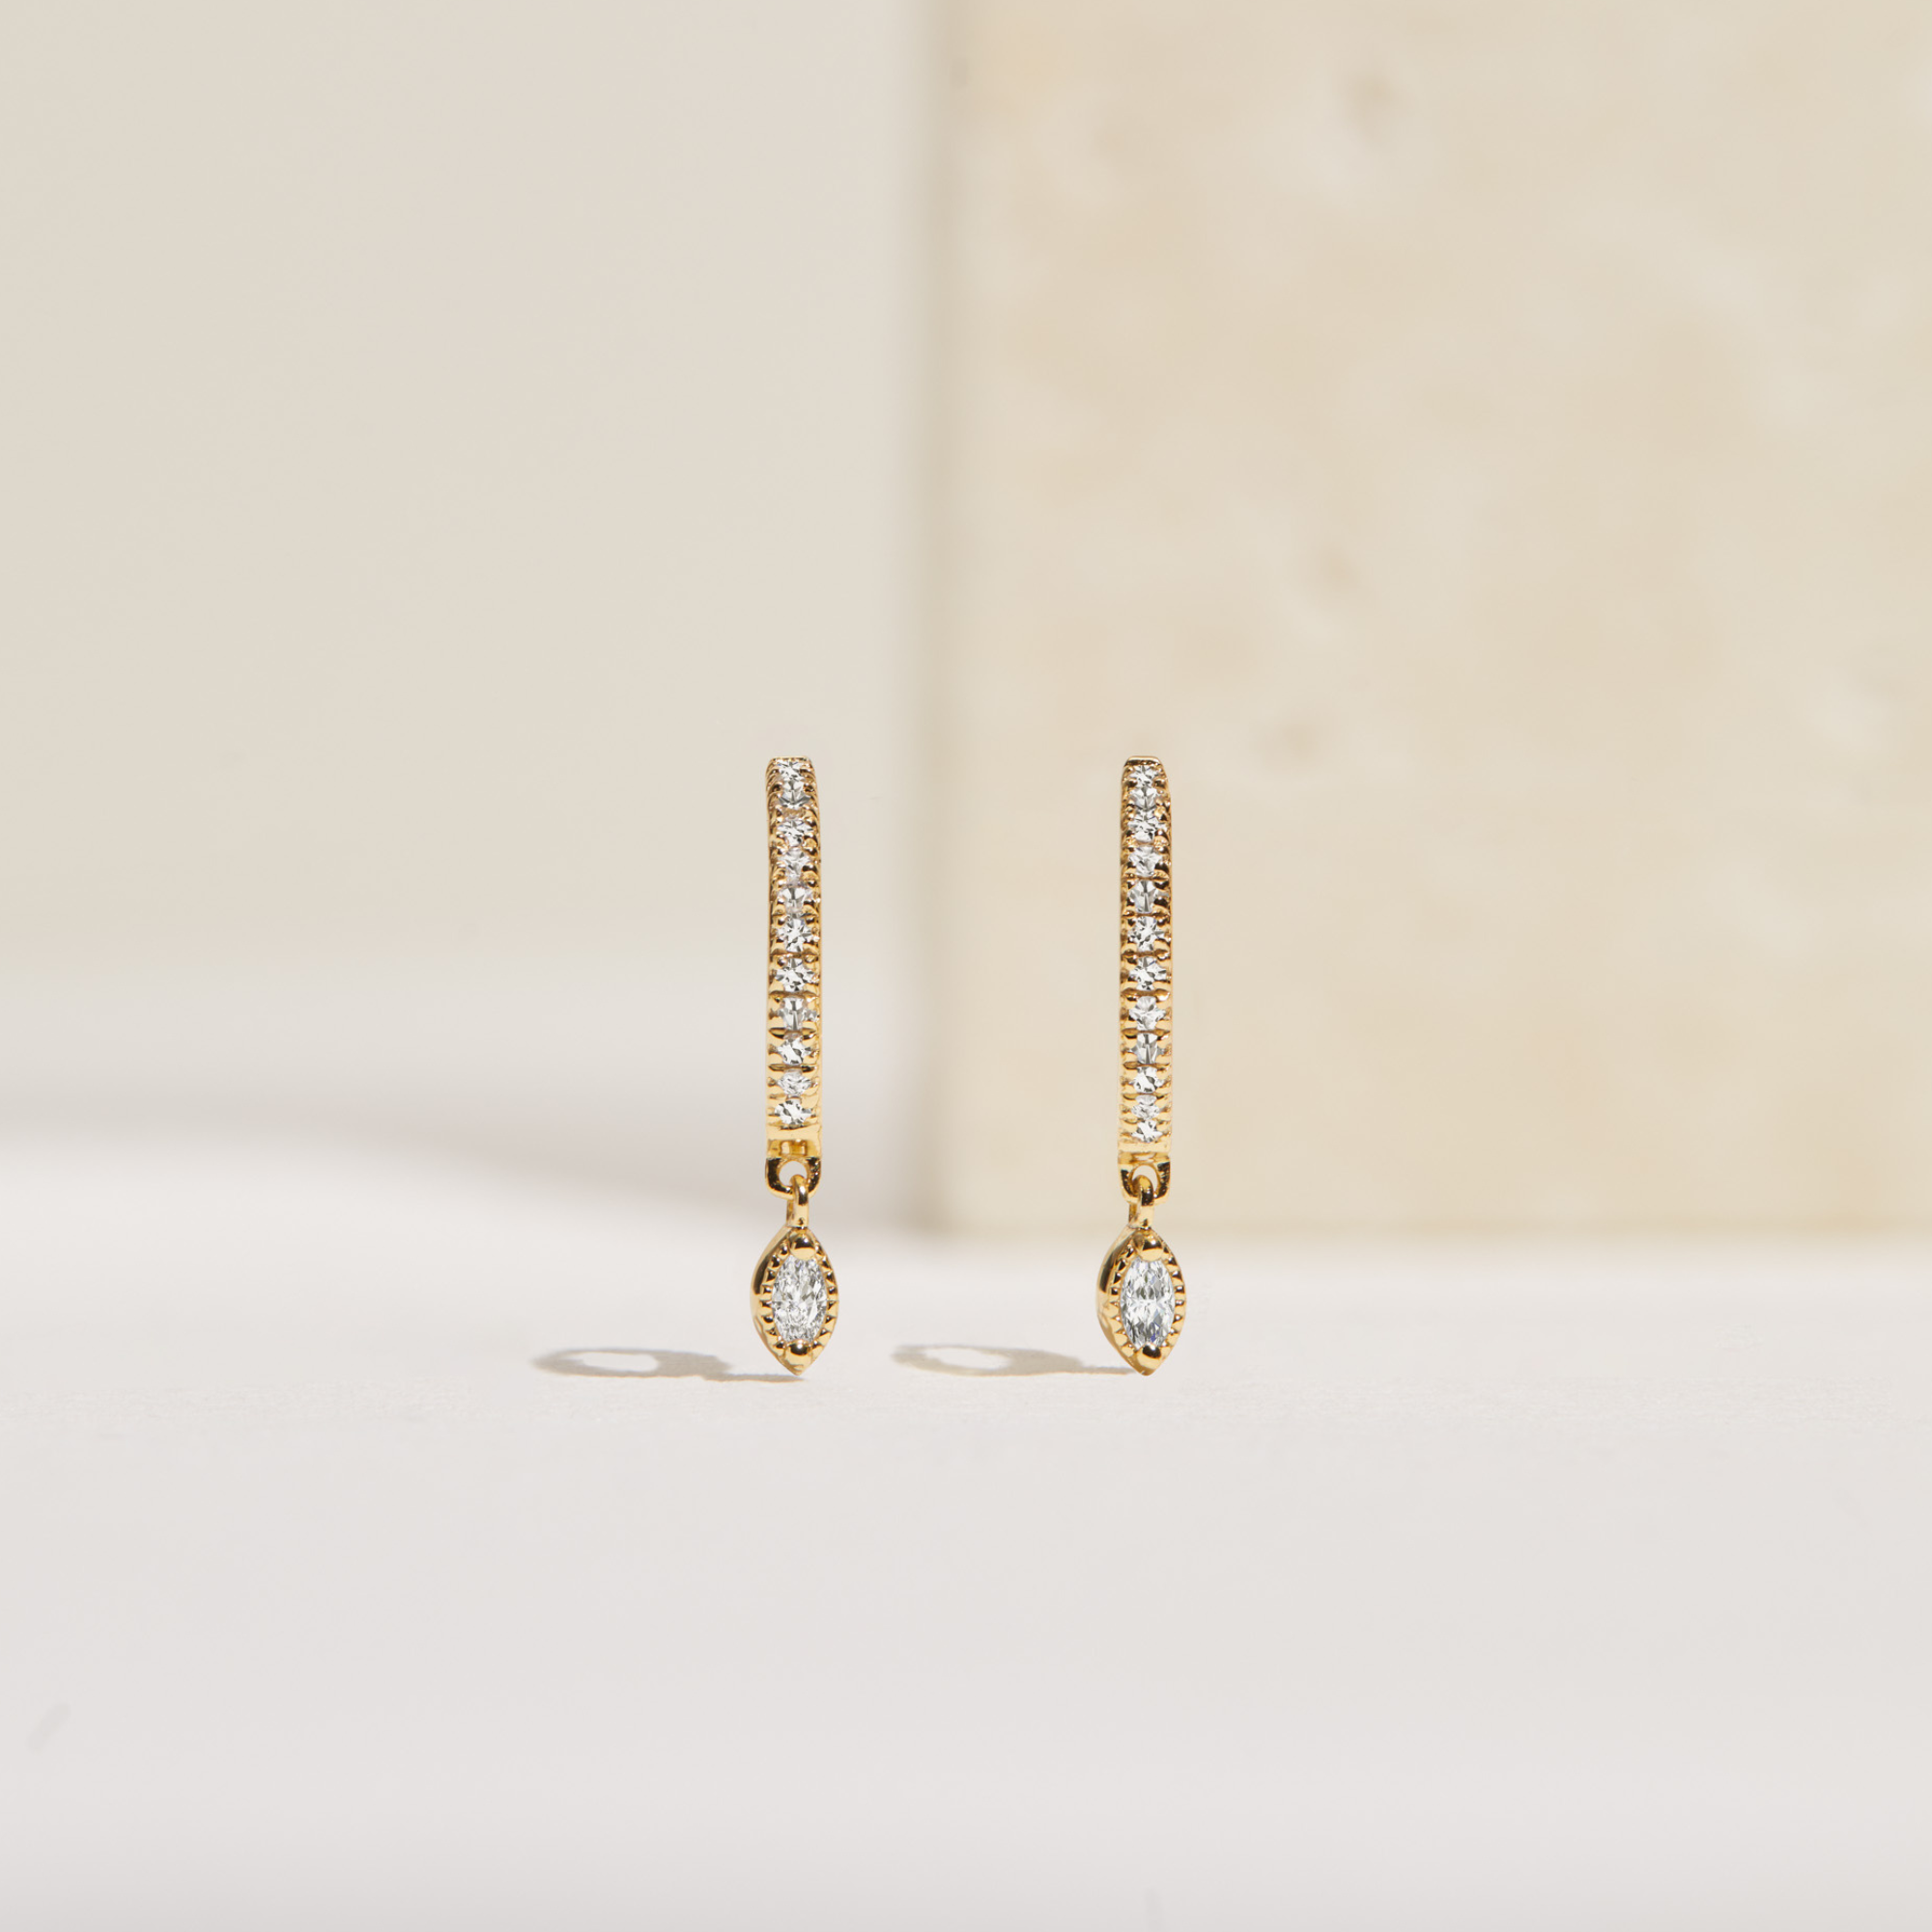 Gold marquise diamond drop hoop earrings over faded cream background